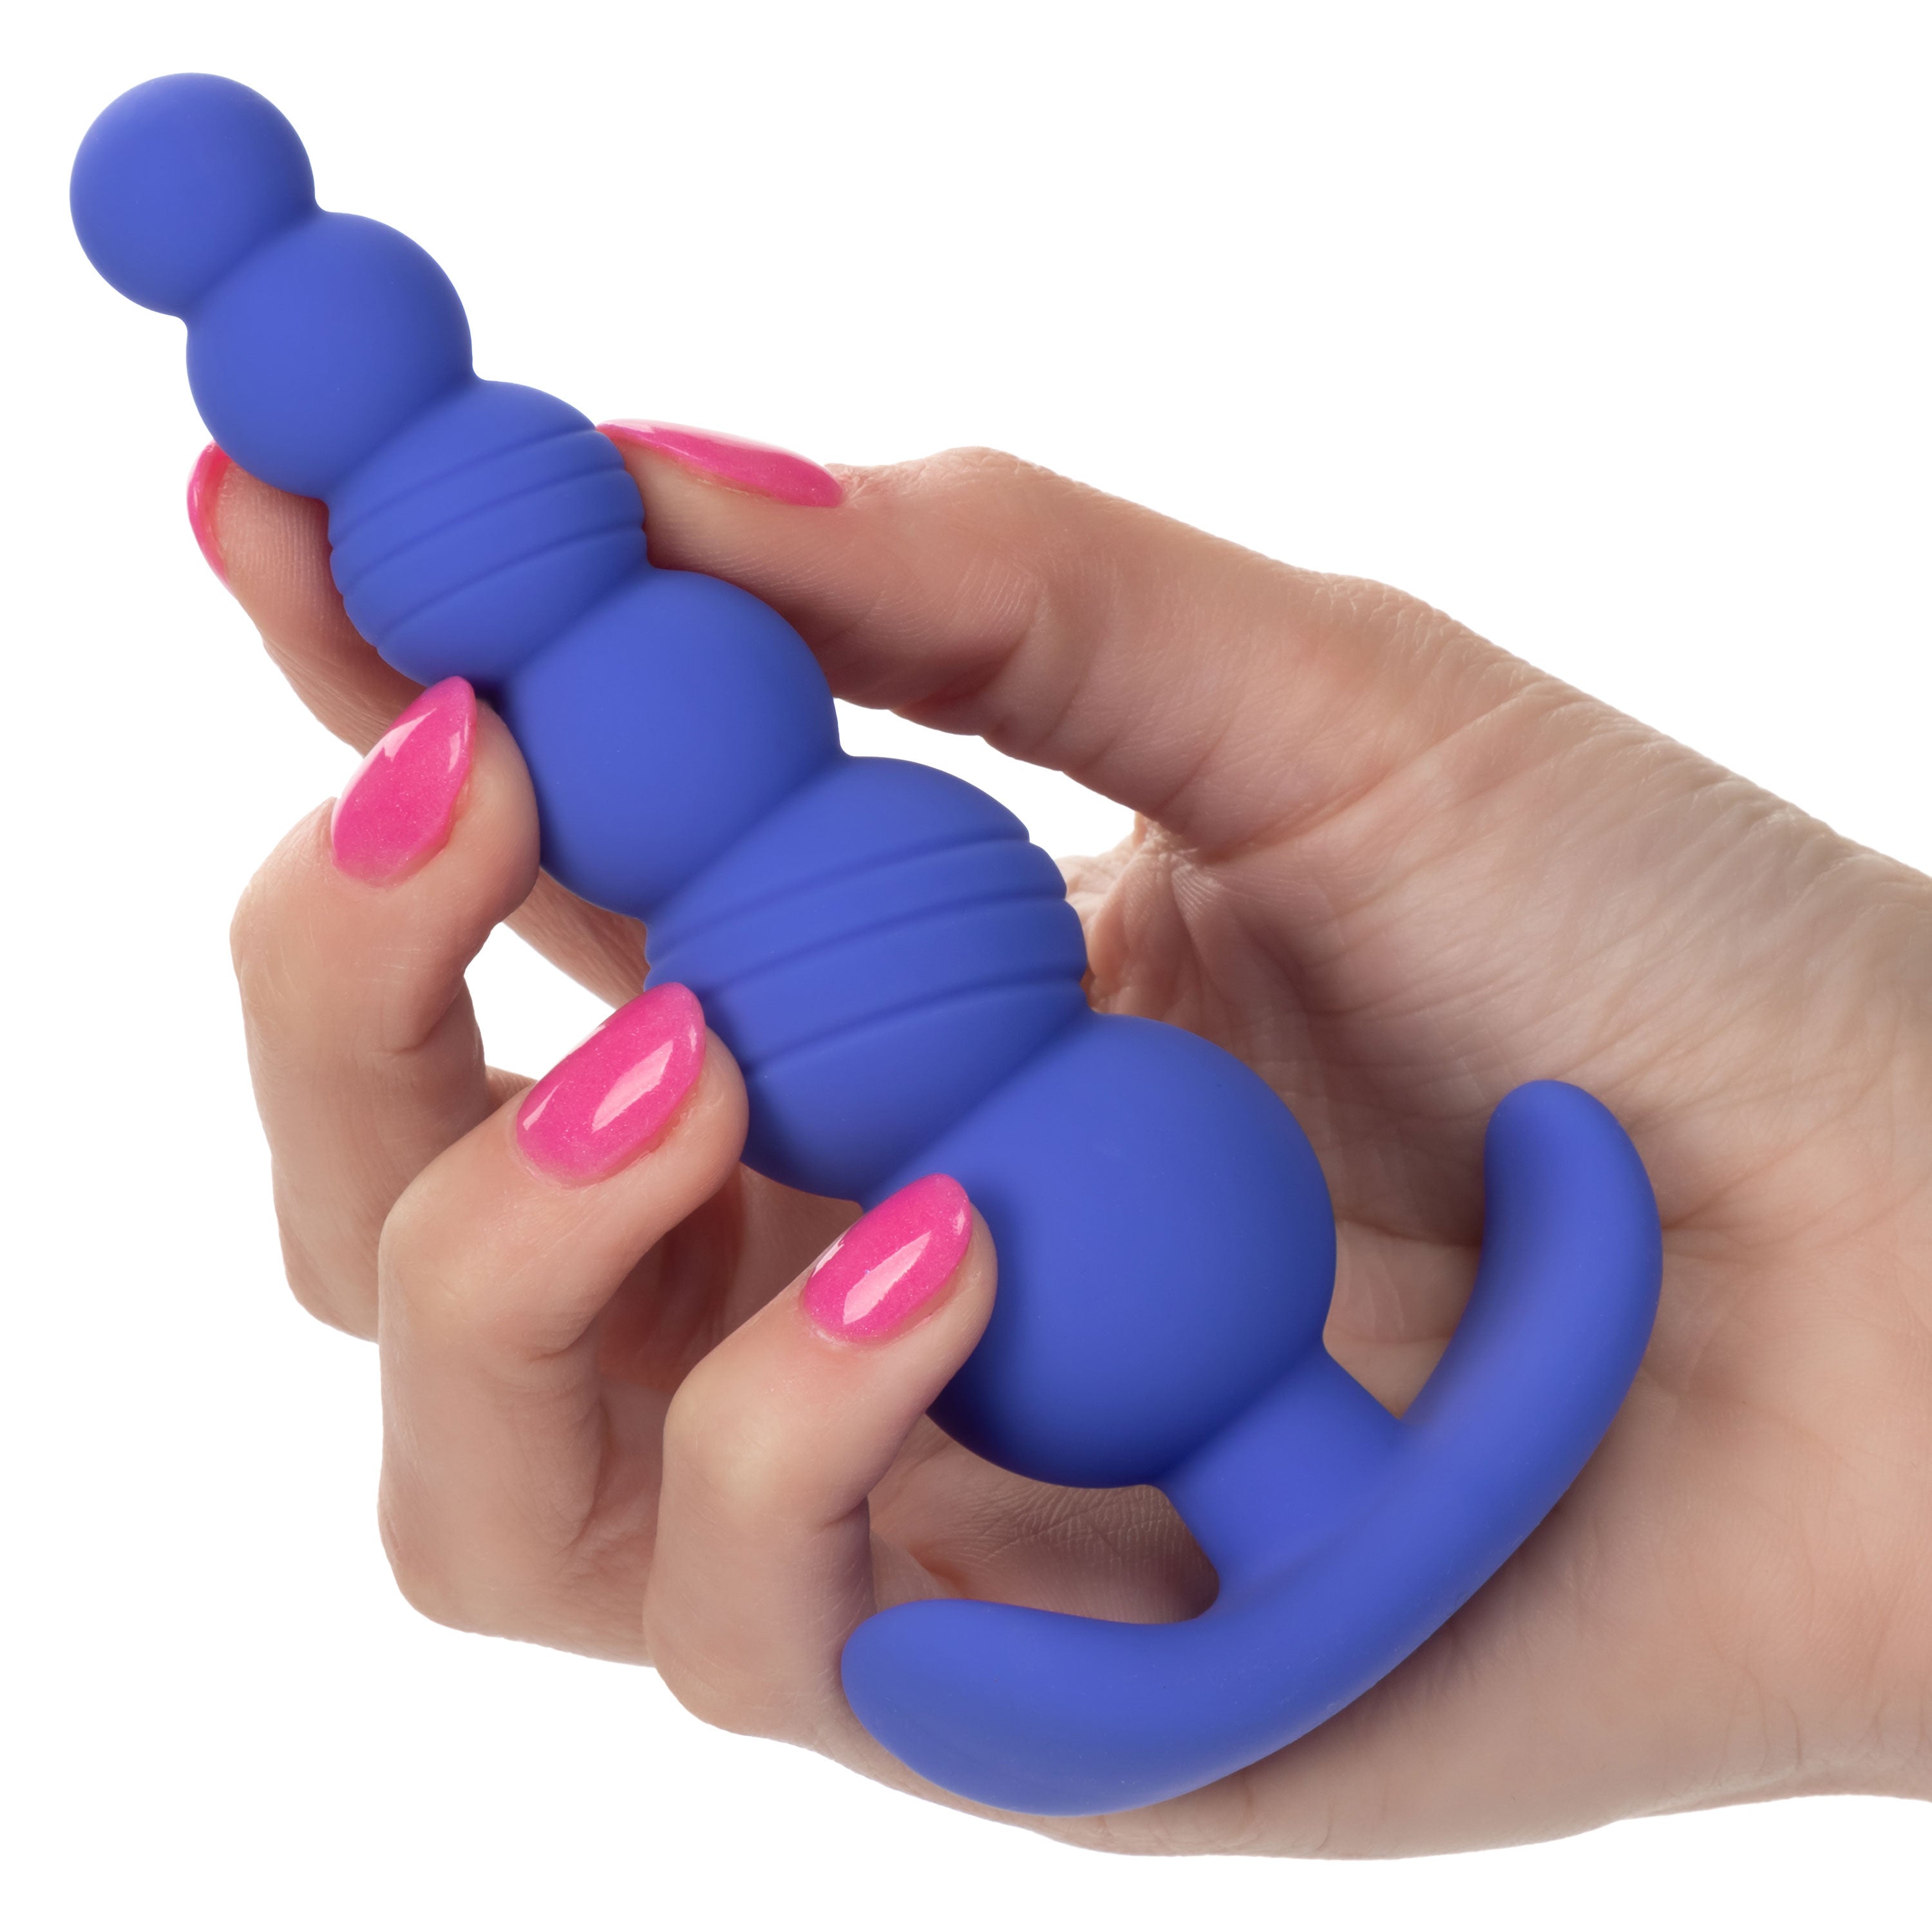 Upgrade Your Pleasure with the Cheeky X-6 Beads Anal Probe